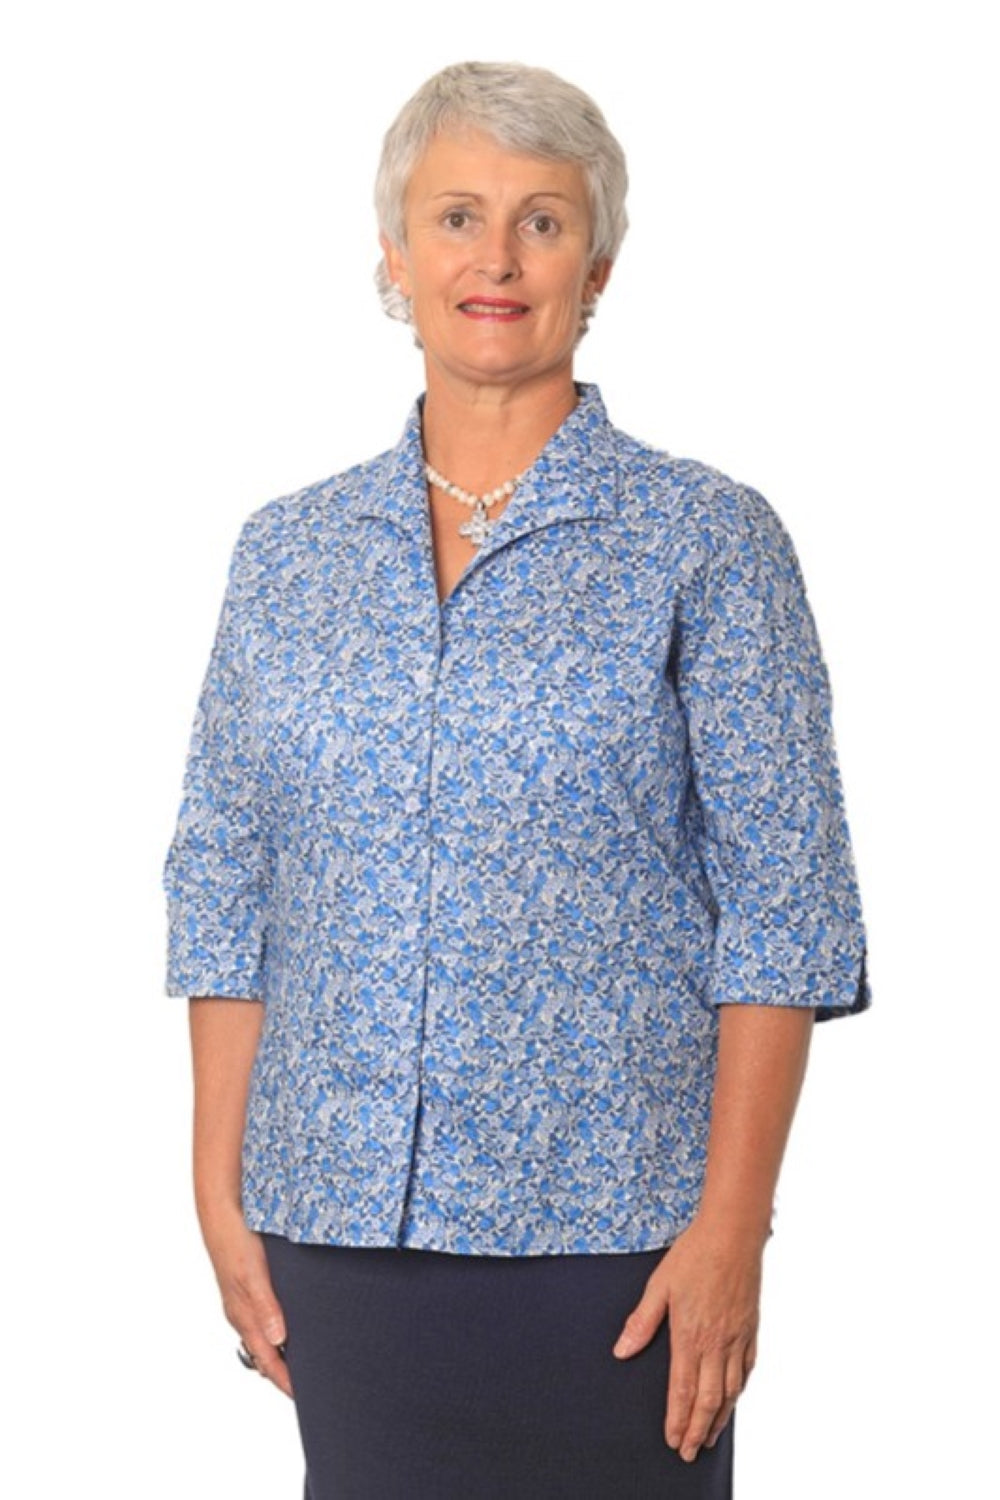 Available now at AOK CLothing, this Daniela Blouse by Liberty of London is made from 100% Tana Lawn cotton and crafted in Italy.